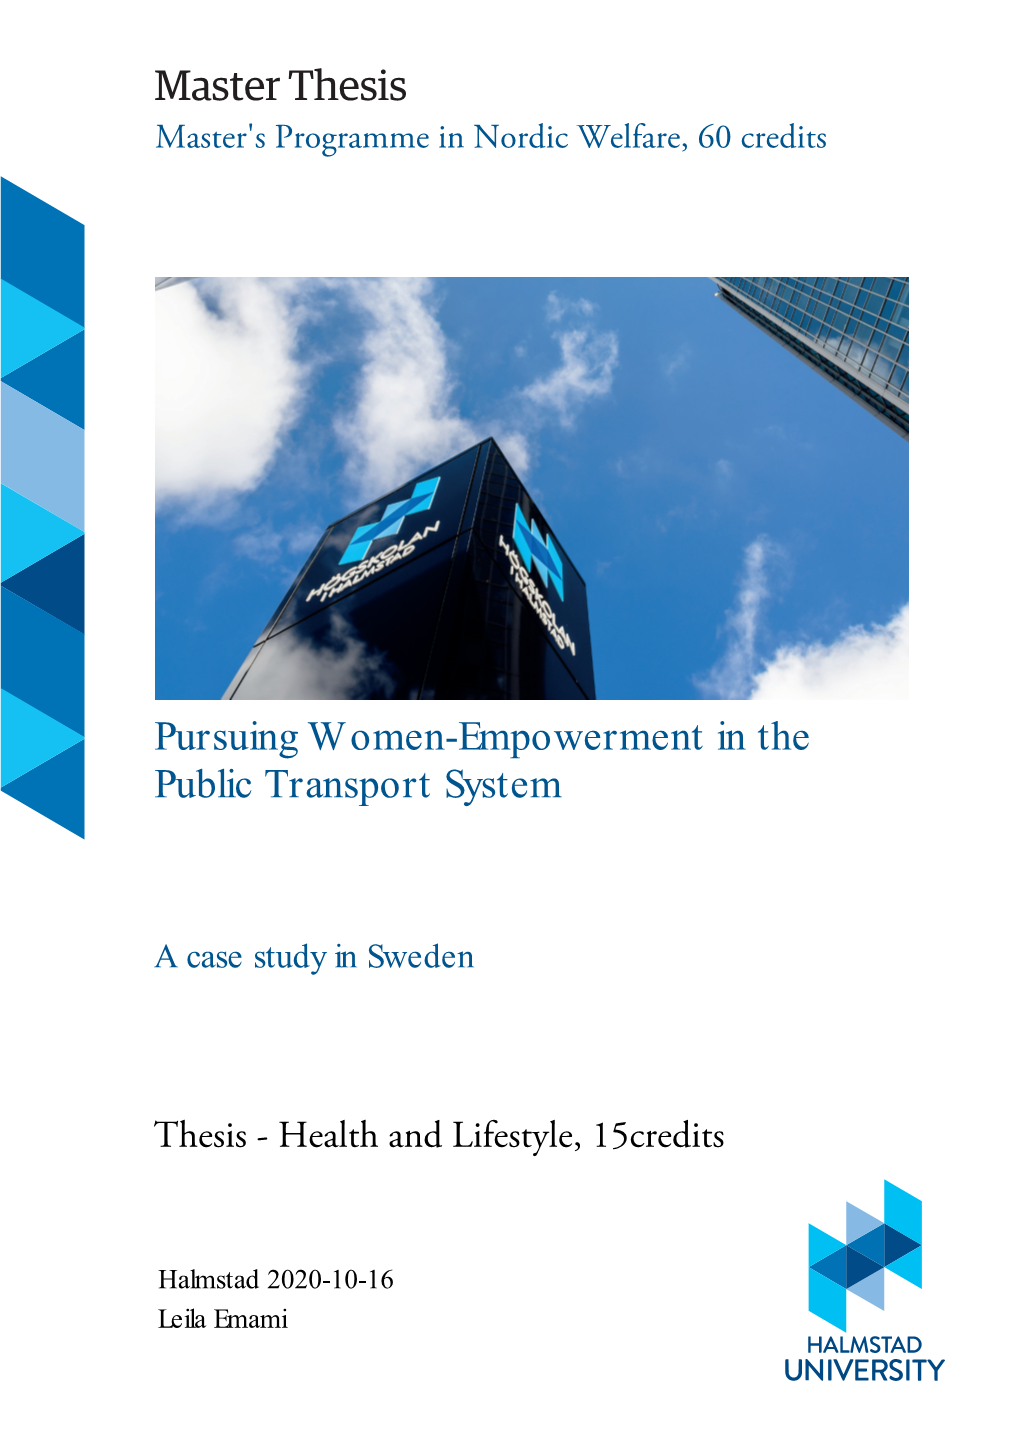 Pursuing Women-Empowerment in the Public Transport System